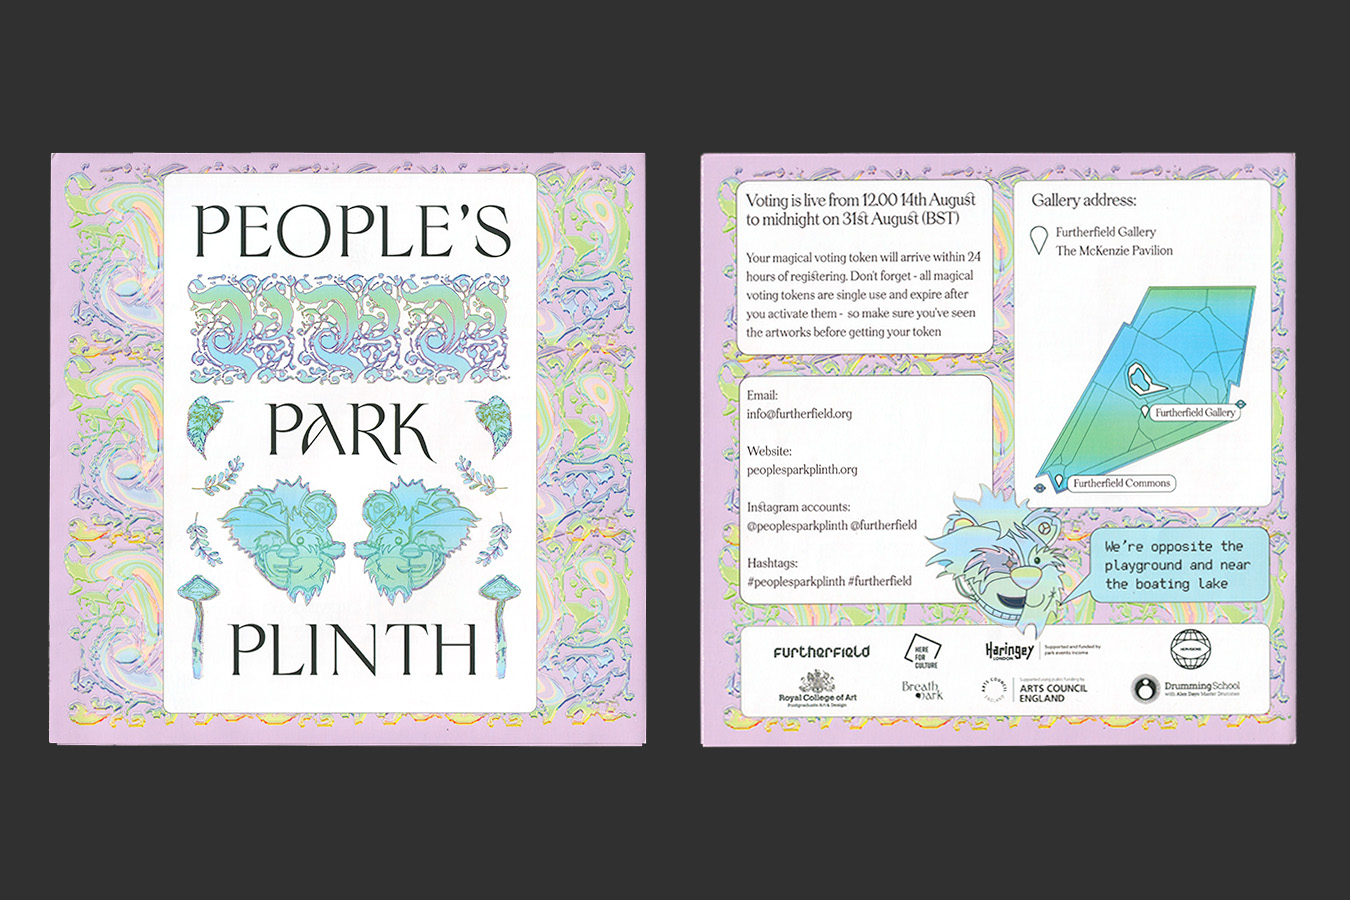 A scan of the People's Park Plinth booklet, the front cover says People's Park Plinth in decorative type, between the letters are shiny gradient leaf illustrations and cyber teddy bears